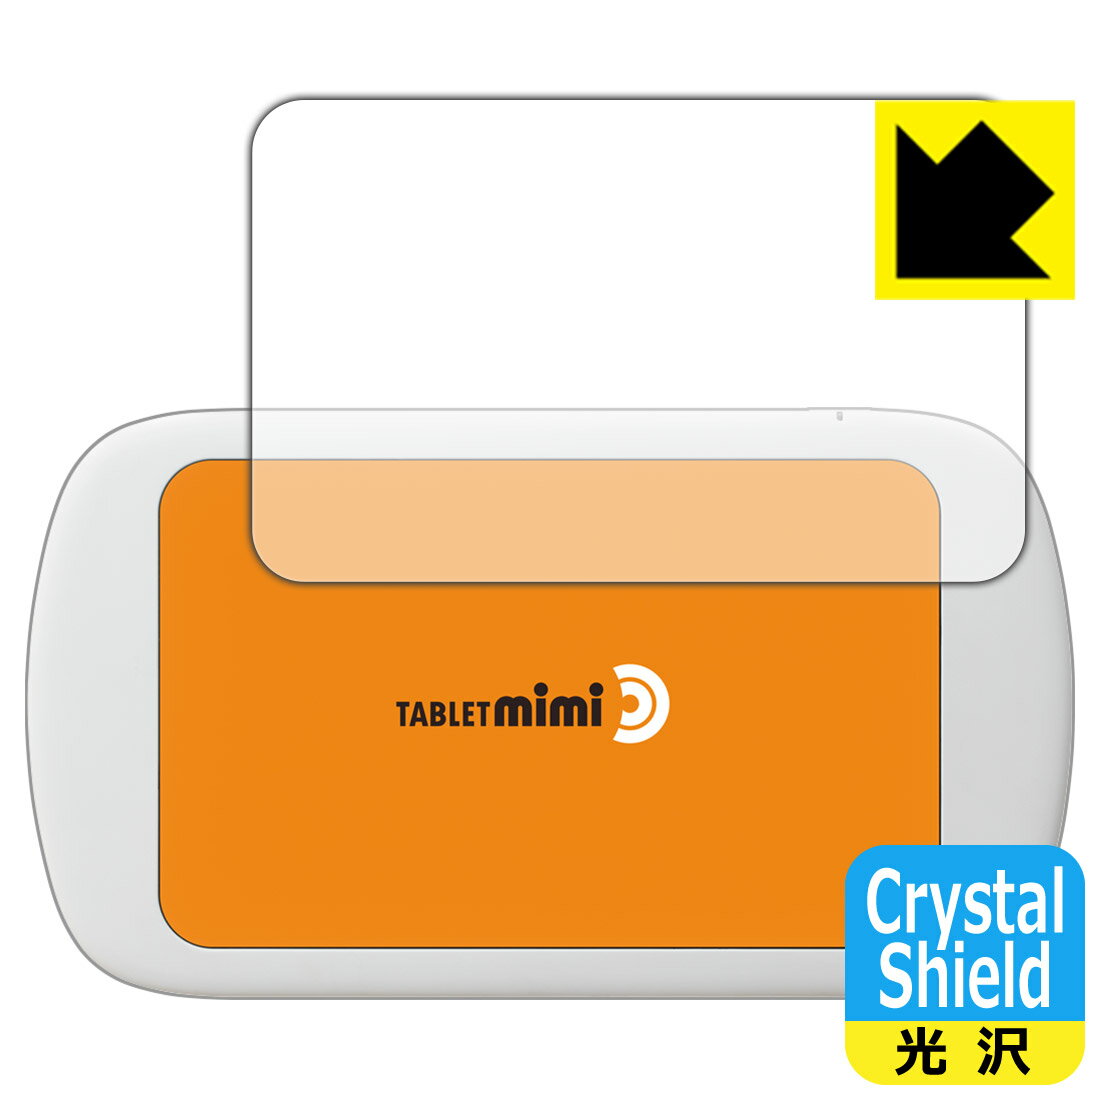 Crystal Shield Tablet mimi タブレット ミミ 日本製 自社製造直販